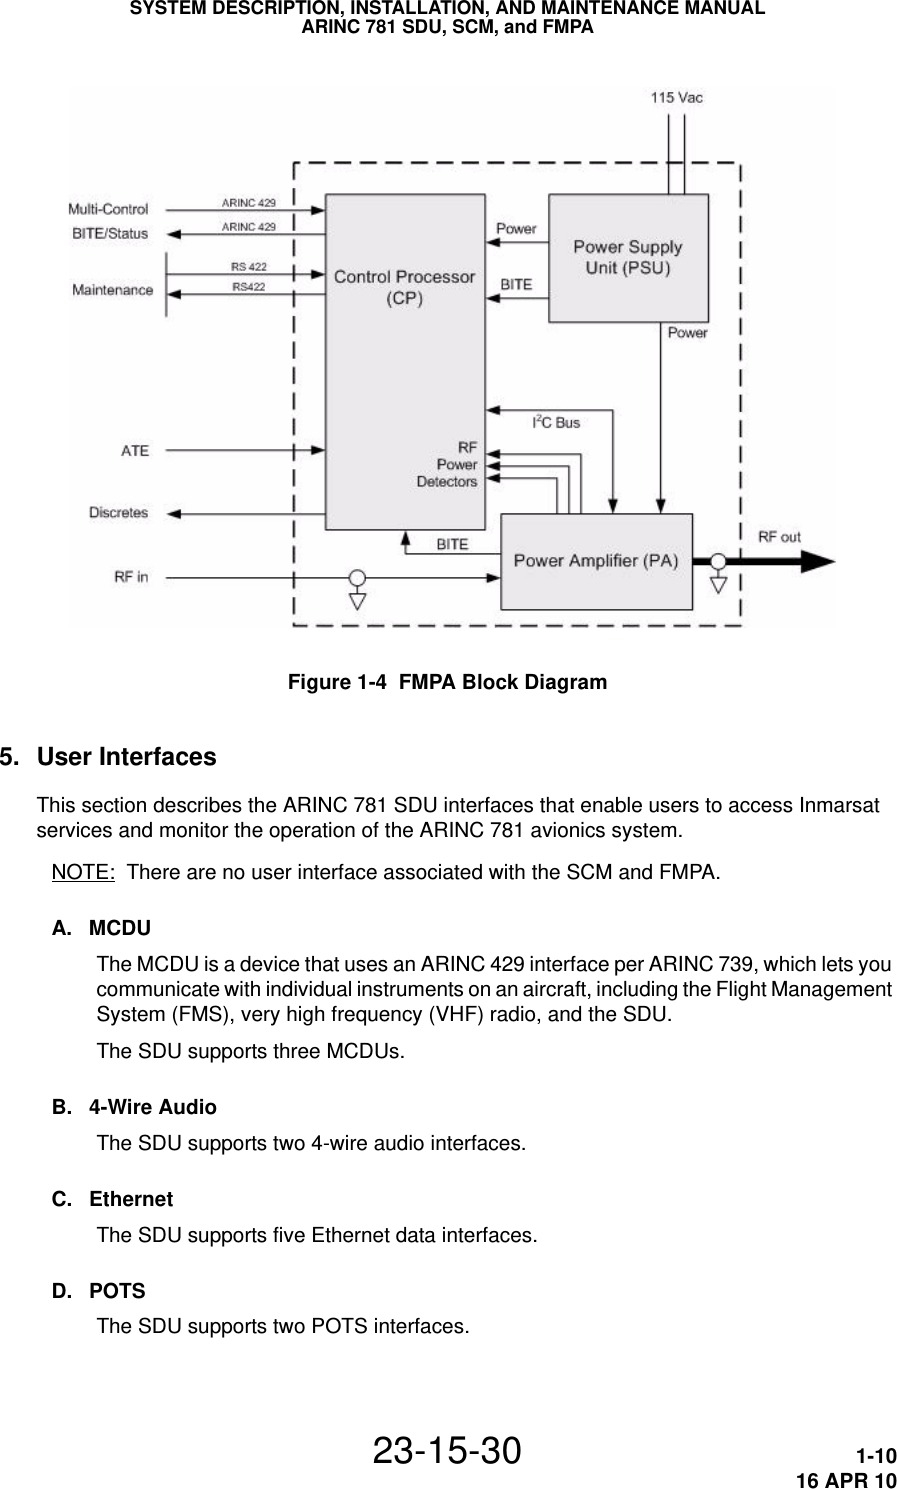 SYSTEM DESCRIPTION, INSTALLATION, AND MAINTENANCE MANUALARINC 781 SDU, SCM, and FMPA23-15-30 1-1016 APR 10Figure 1-4  FMPA Block Diagram5. User InterfacesThis section describes the ARINC 781 SDU interfaces that enable users to access Inmarsat services and monitor the operation of the ARINC 781 avionics system.NOTE: There are no user interface associated with the SCM and FMPA.A. MCDUThe MCDU is a device that uses an ARINC 429 interface per ARINC 739, which lets you communicate with individual instruments on an aircraft, including the Flight Management System (FMS), very high frequency (VHF) radio, and the SDU.The SDU supports three MCDUs.B. 4-Wire AudioThe SDU supports two 4-wire audio interfaces.C. EthernetThe SDU supports five Ethernet data interfaces.D. POTSThe SDU supports two POTS interfaces.